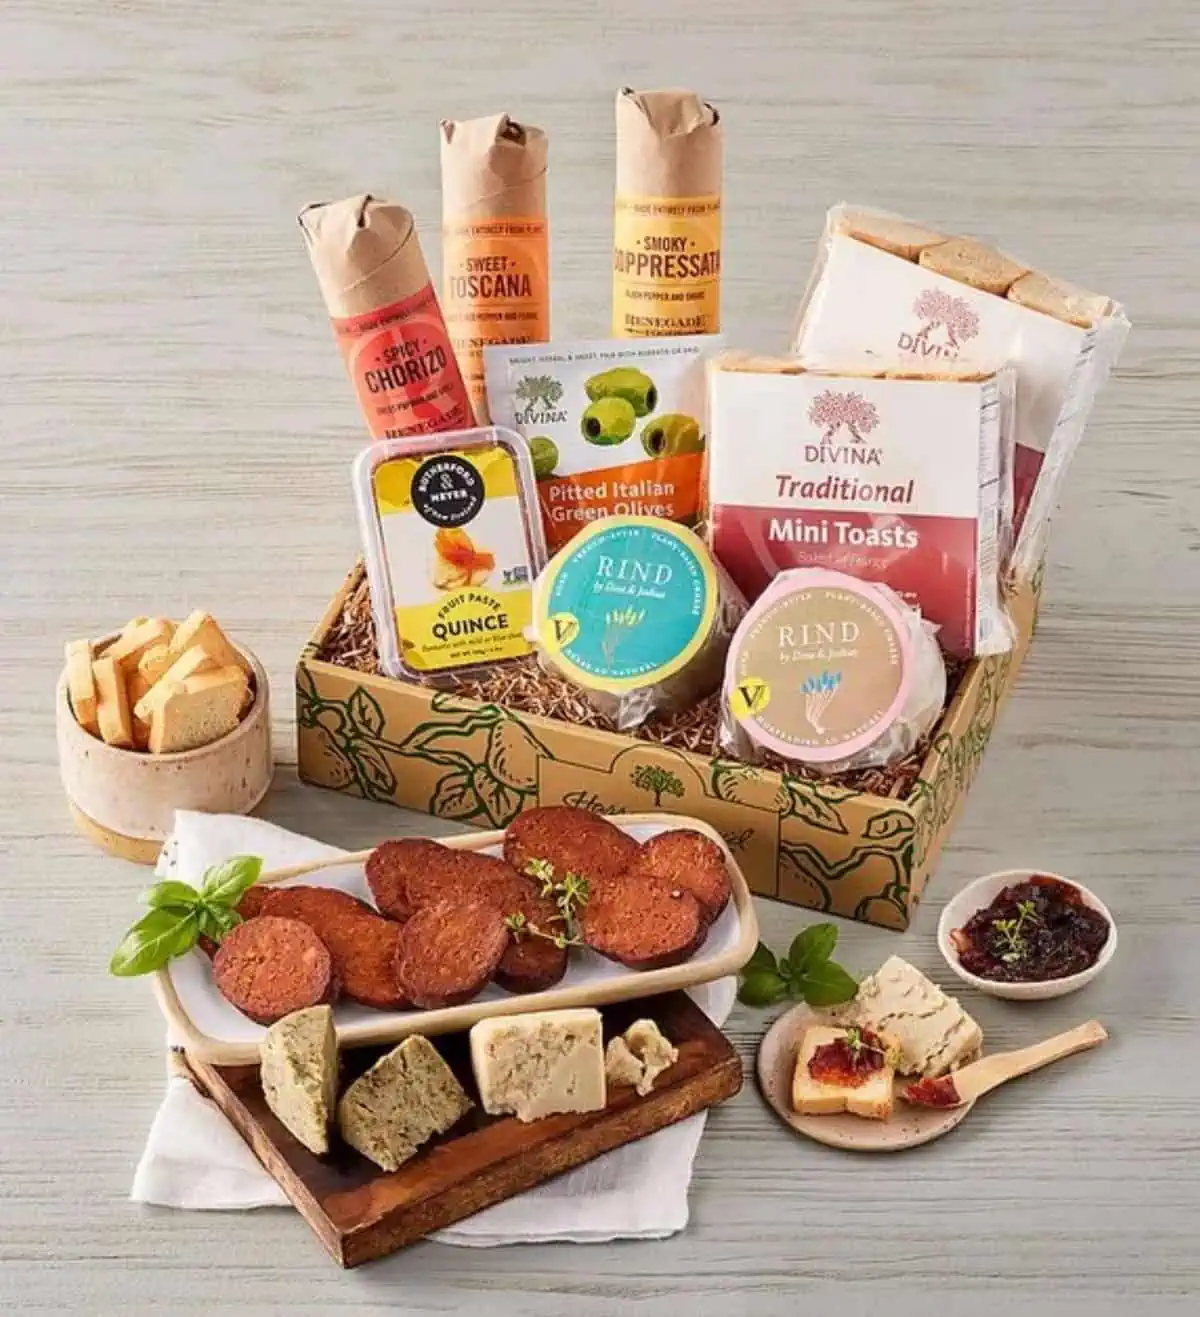 A vegan charcuterie box from Harry and David.